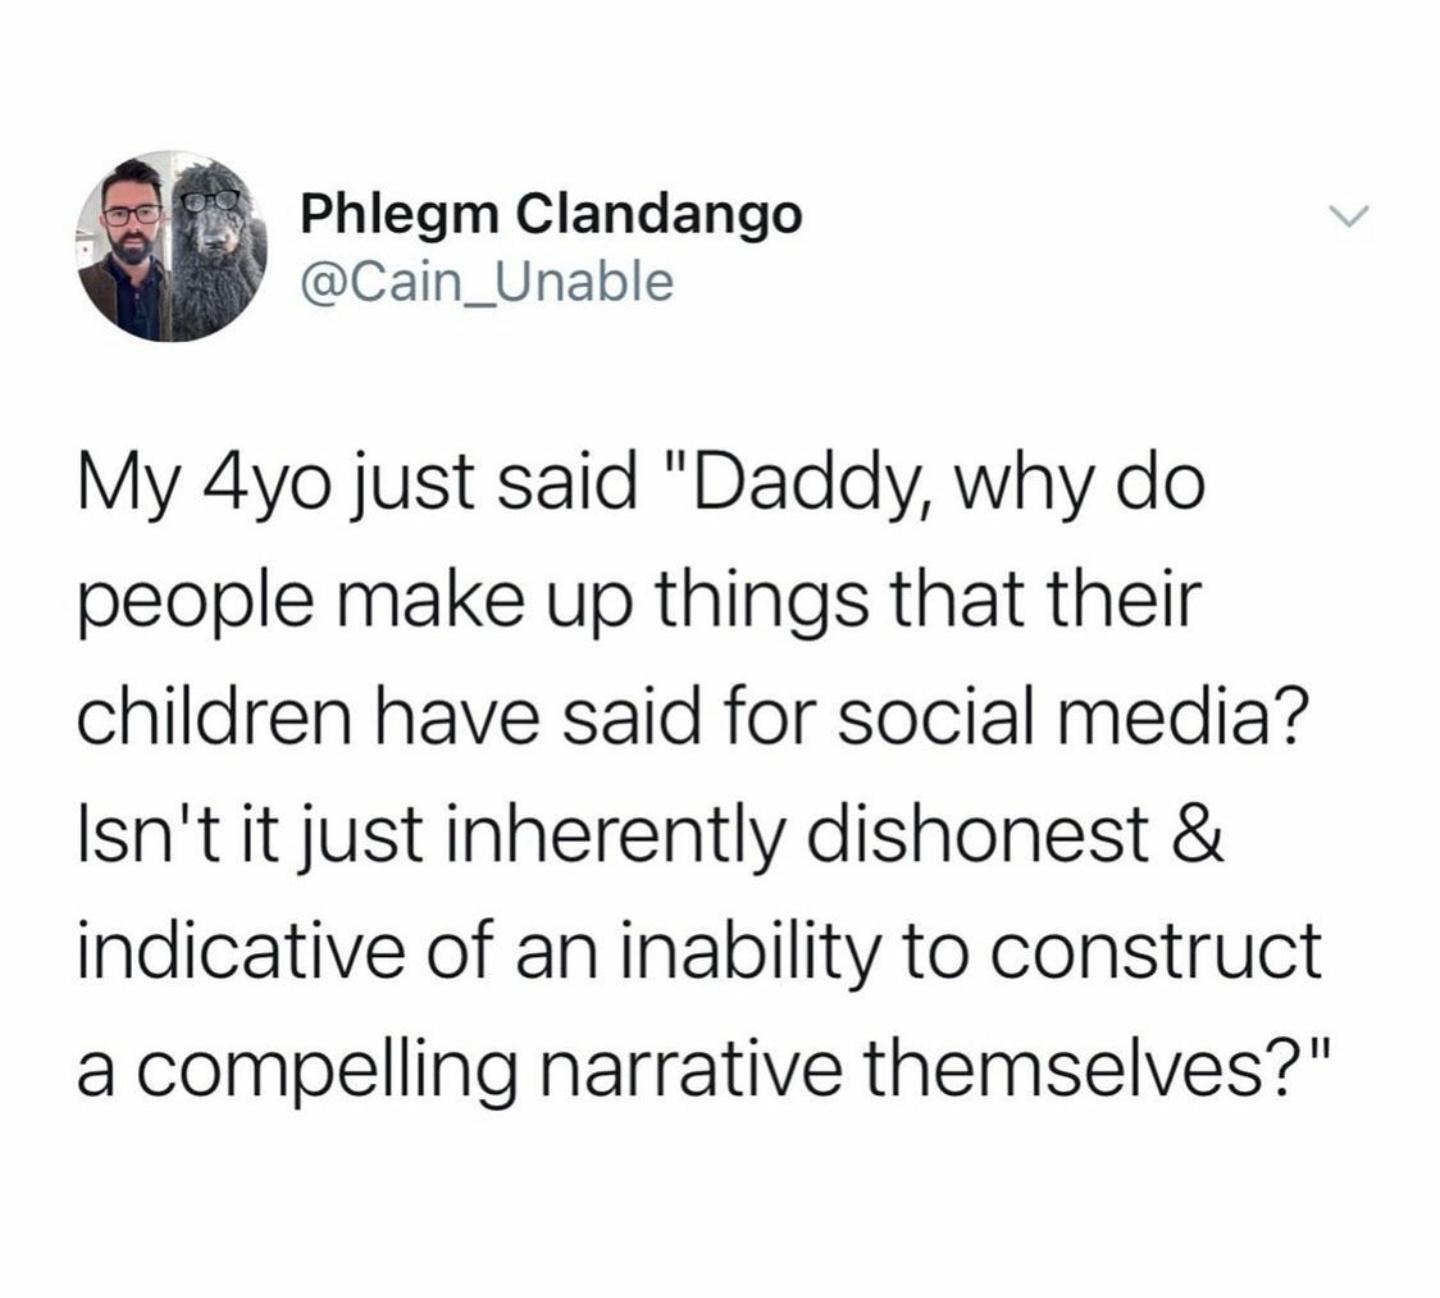 r whitepeopletwitter - Phlegm Clandango My 4yo just said "Daddy, why do people make up things that their children have said for social media? Isn't it just inherently dishonest & indicative of an inability to construct a compelling narrative themselves?"